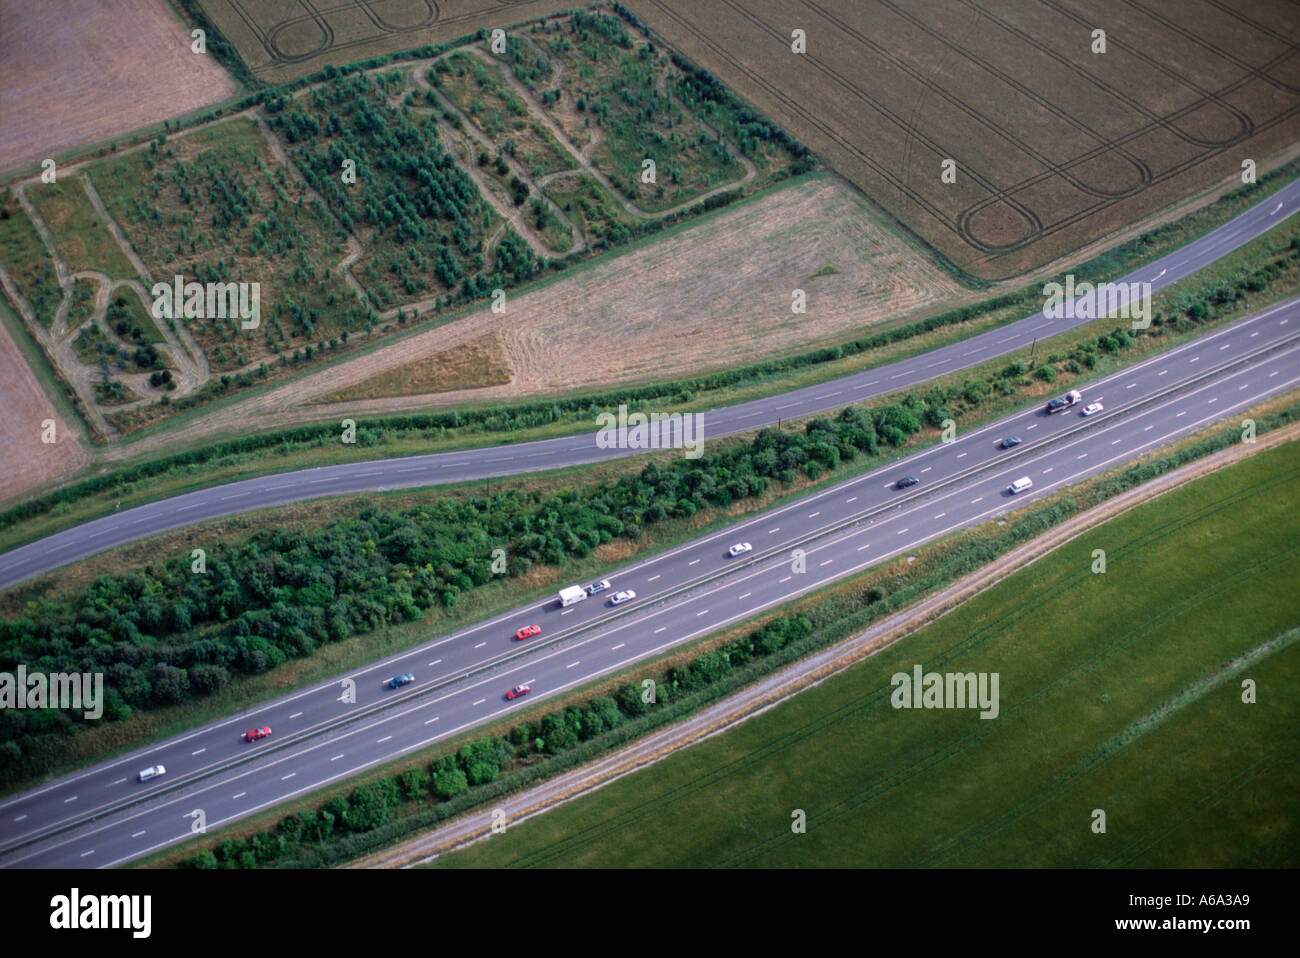 Aerial View of a303 and sliproad at Wiltshire Enlgand UK Stock Photo ...